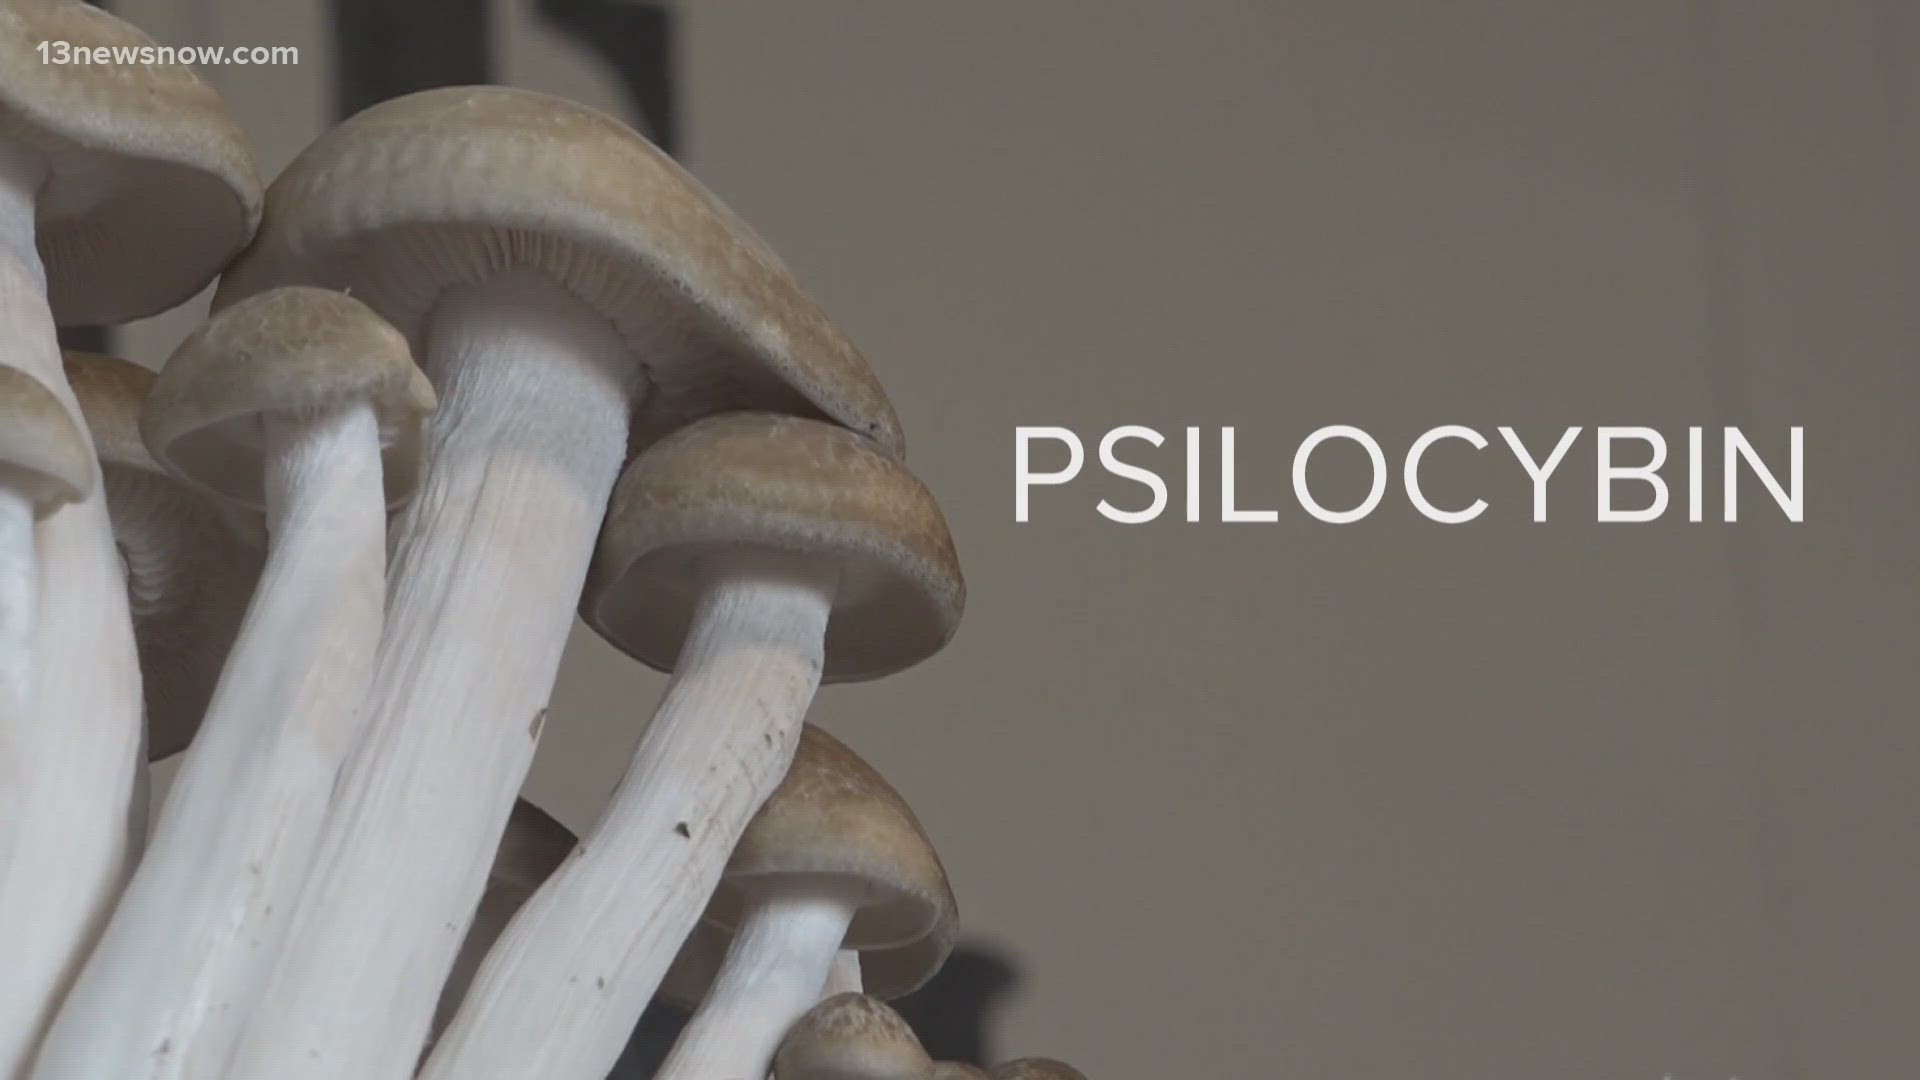 The use of psychedelics is at the center of a push to help veterans suffering from post-traumatic stress disorder (PTSD).